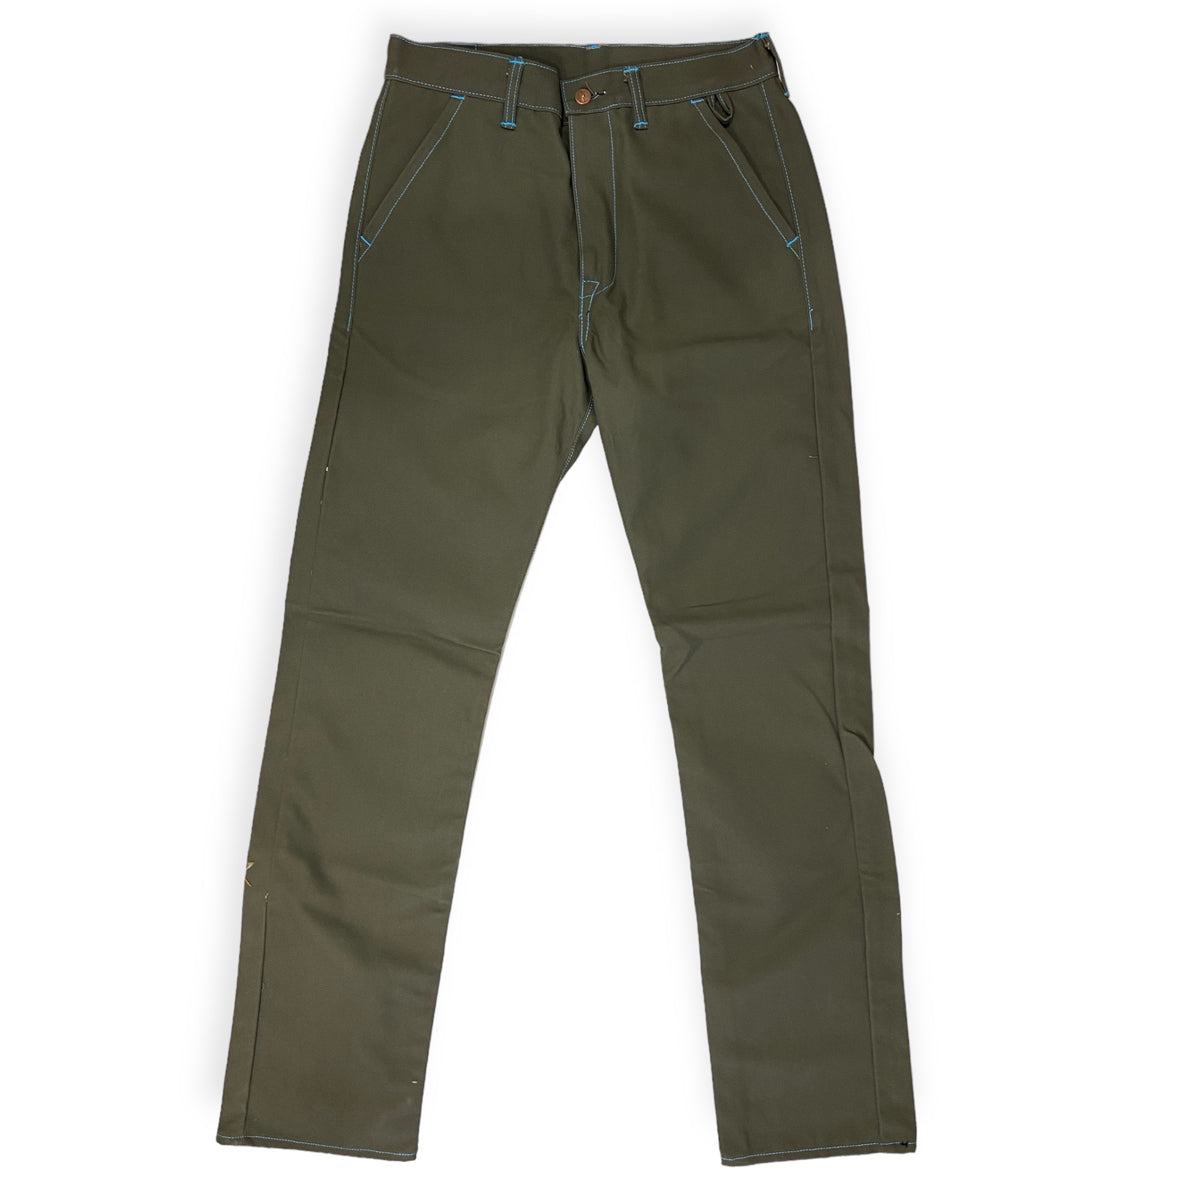 OPSTK 32W 36L 997 Miner Fit  - #133 12oz SeaGrass Duck Canvas FIELDHAND Chino